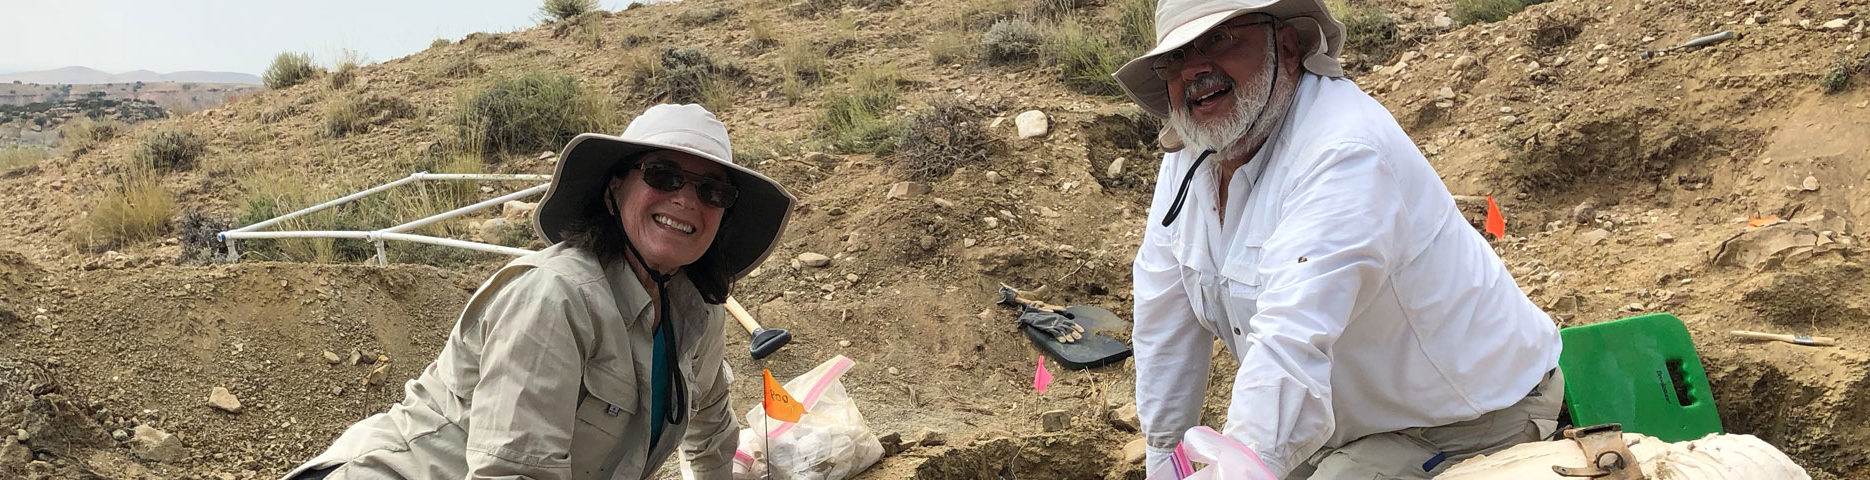 Karen and Wayne lattuca working in dirt in fossil bed surrounded by tools of the trade